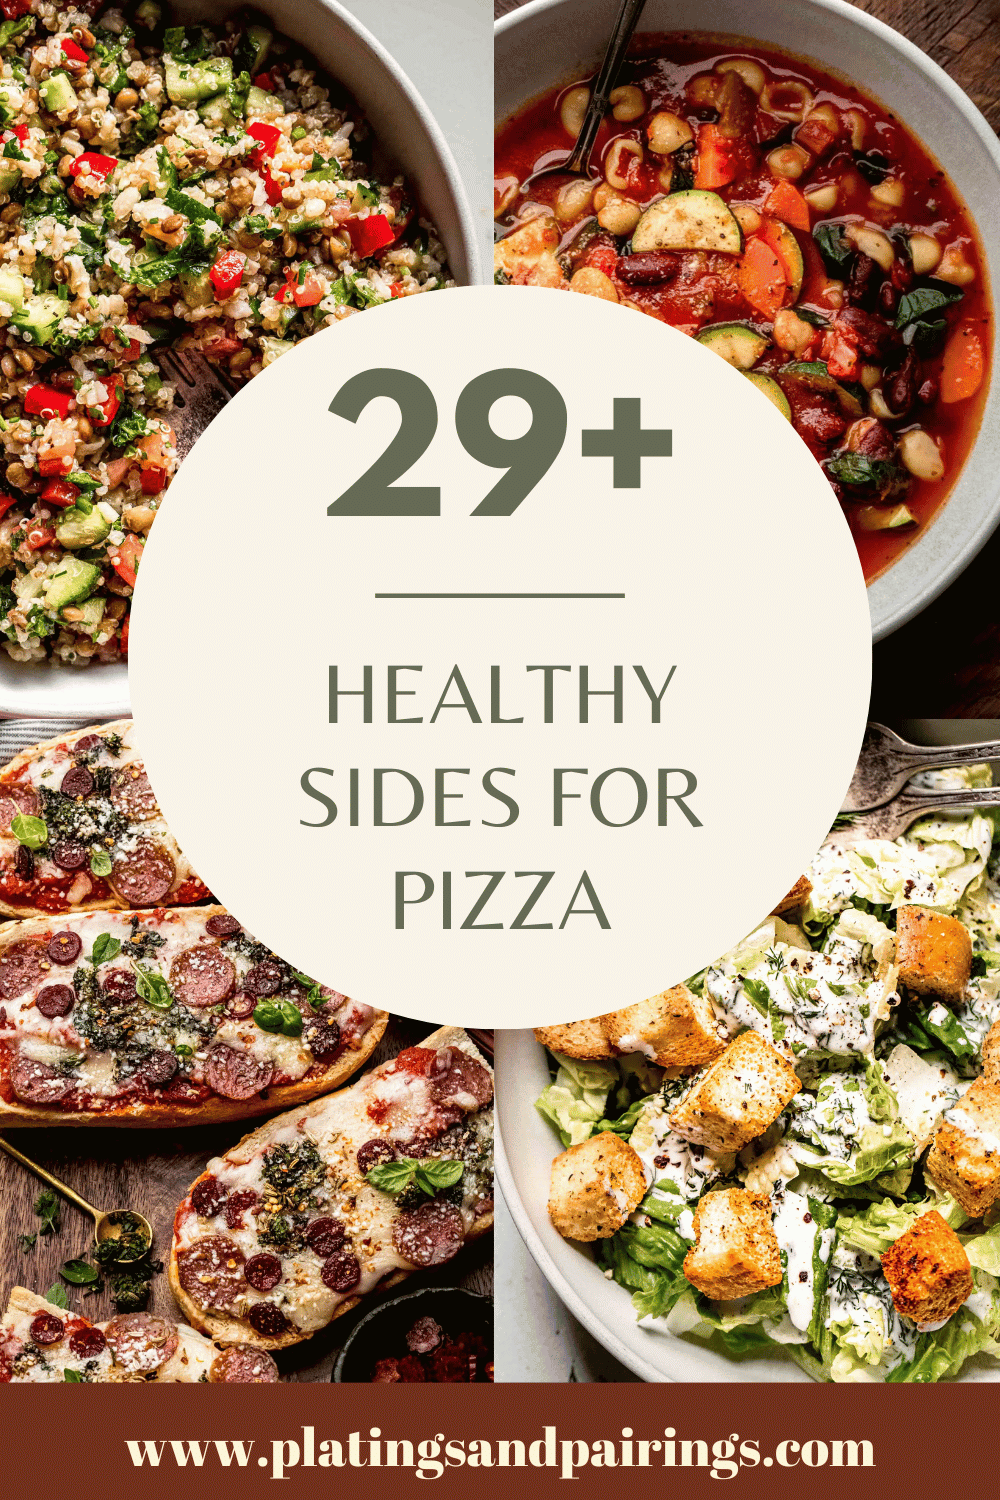 Collage of healthy sides for pizza with text overlay.